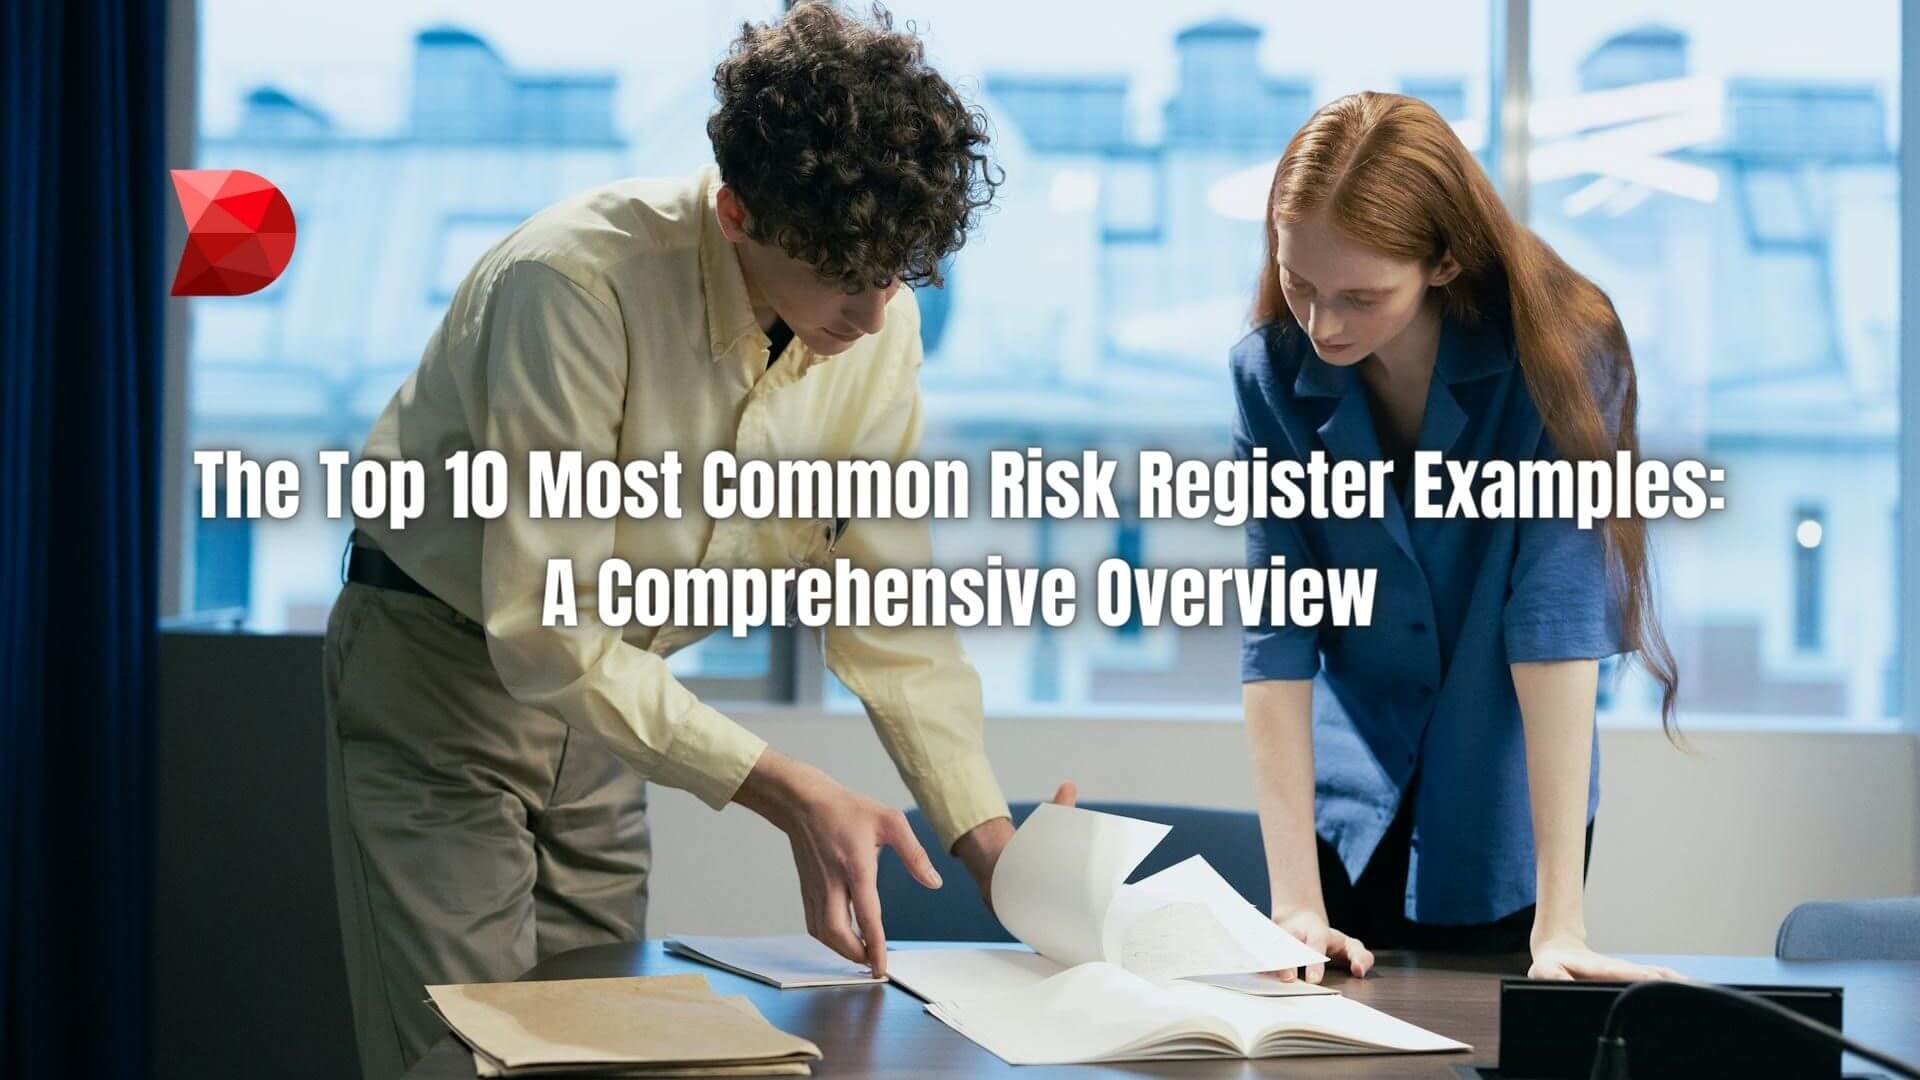 Empower your risk management efforts with our definitive guide. Explore the top 10 risk register examples and safeguard your business.